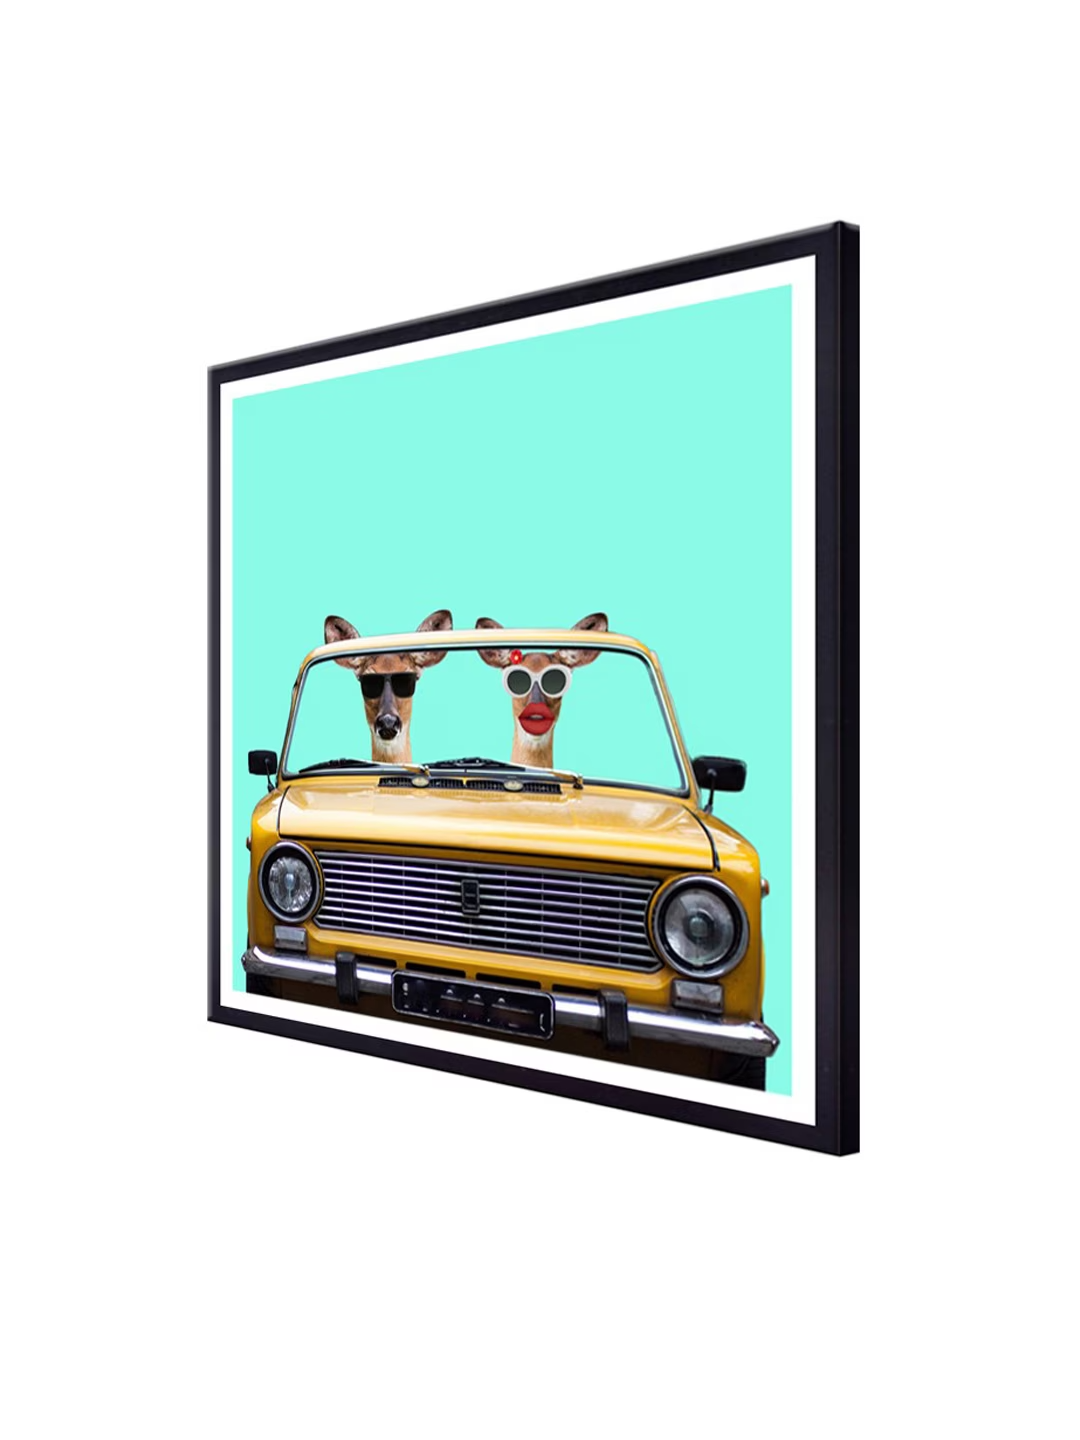 Turquoise Blue & Yellow Cartoons And Car Printed Canvas Wall Art